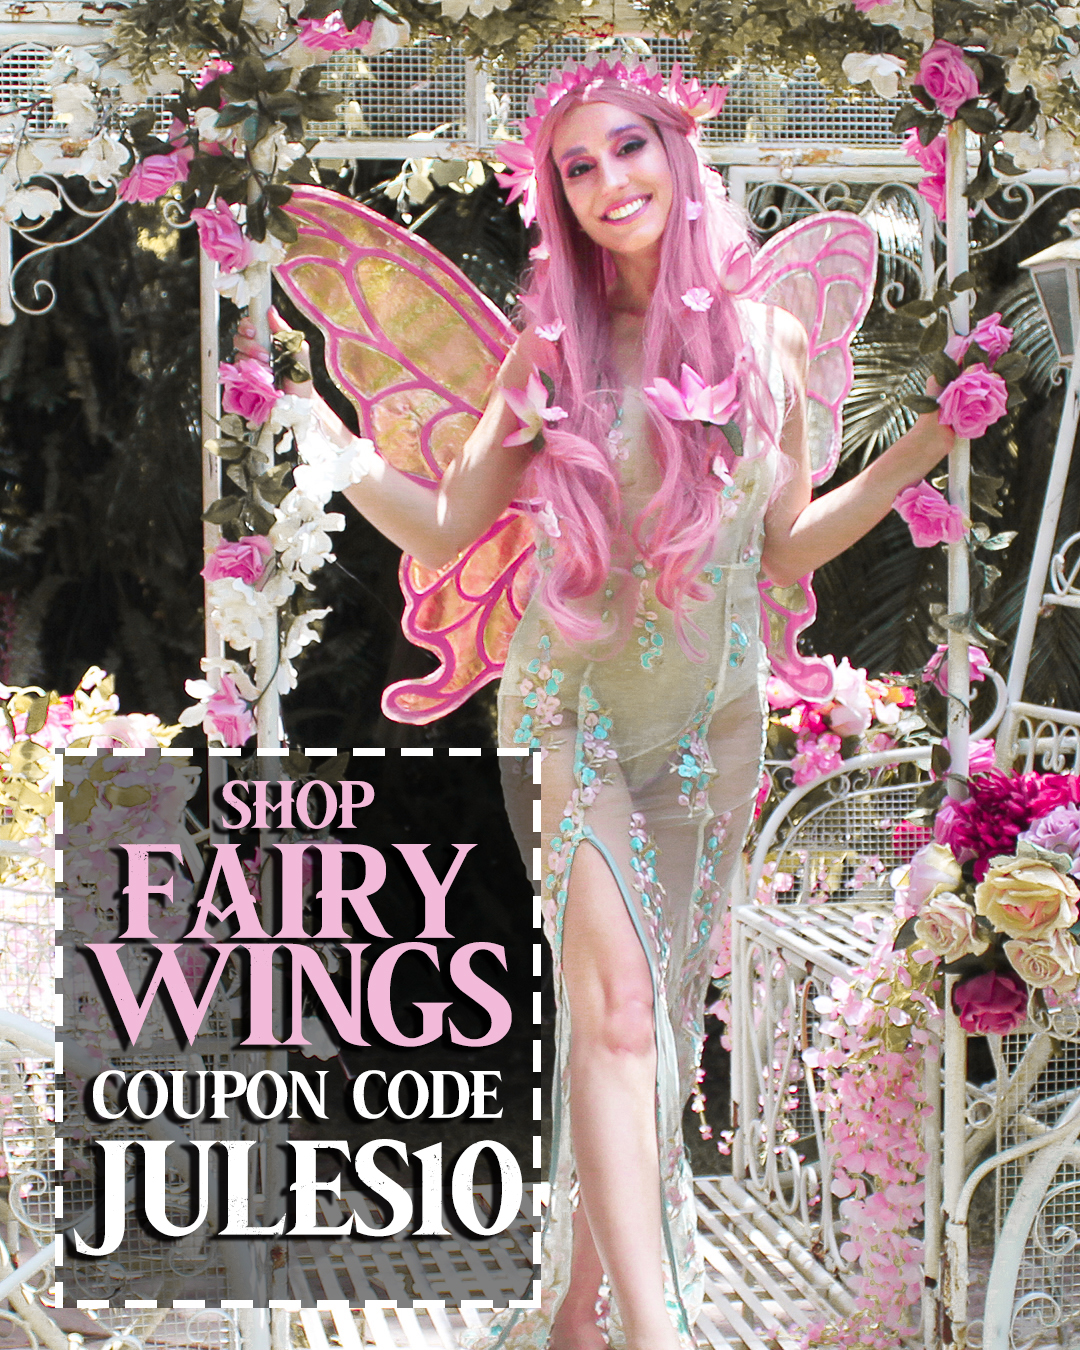 Fairy Wings Coupon code for 10% discount at Once Upon a Fairy Dream: JULES10